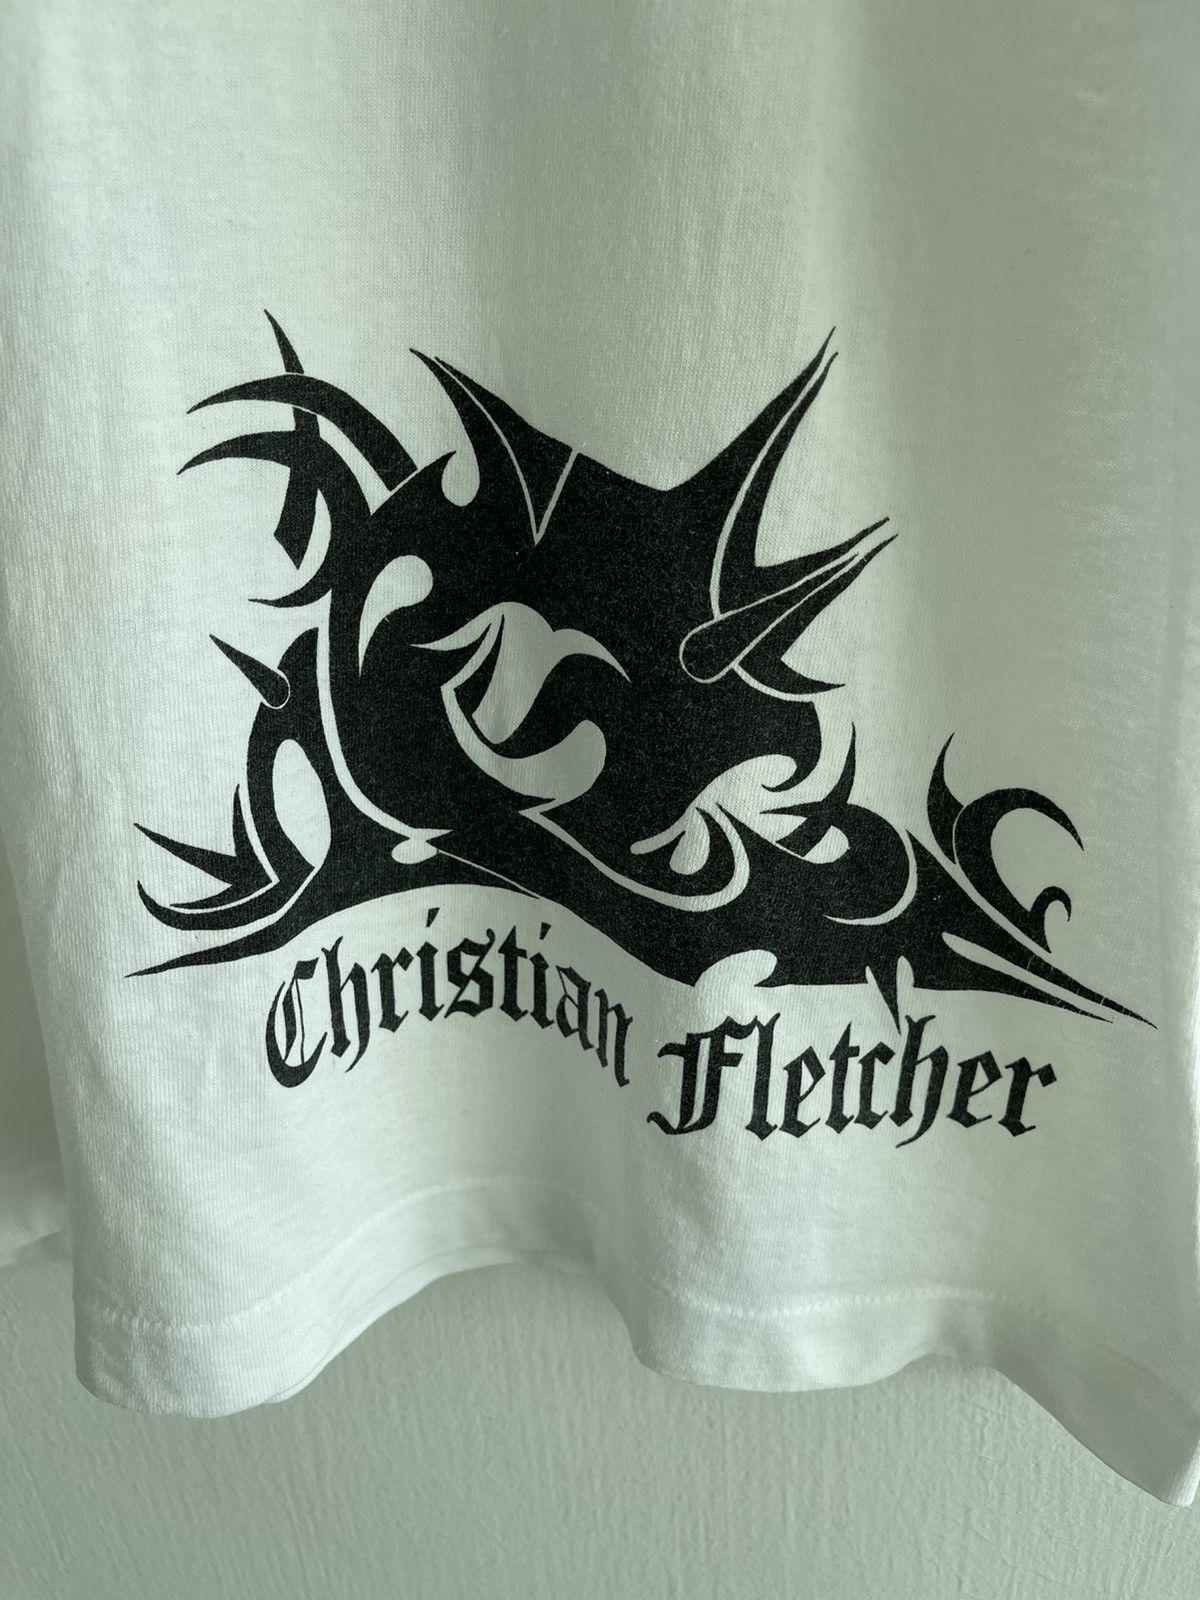 VINTAGE 90S CHRISTIAN FLETCHER T SHIRT MADE IN USA - 4